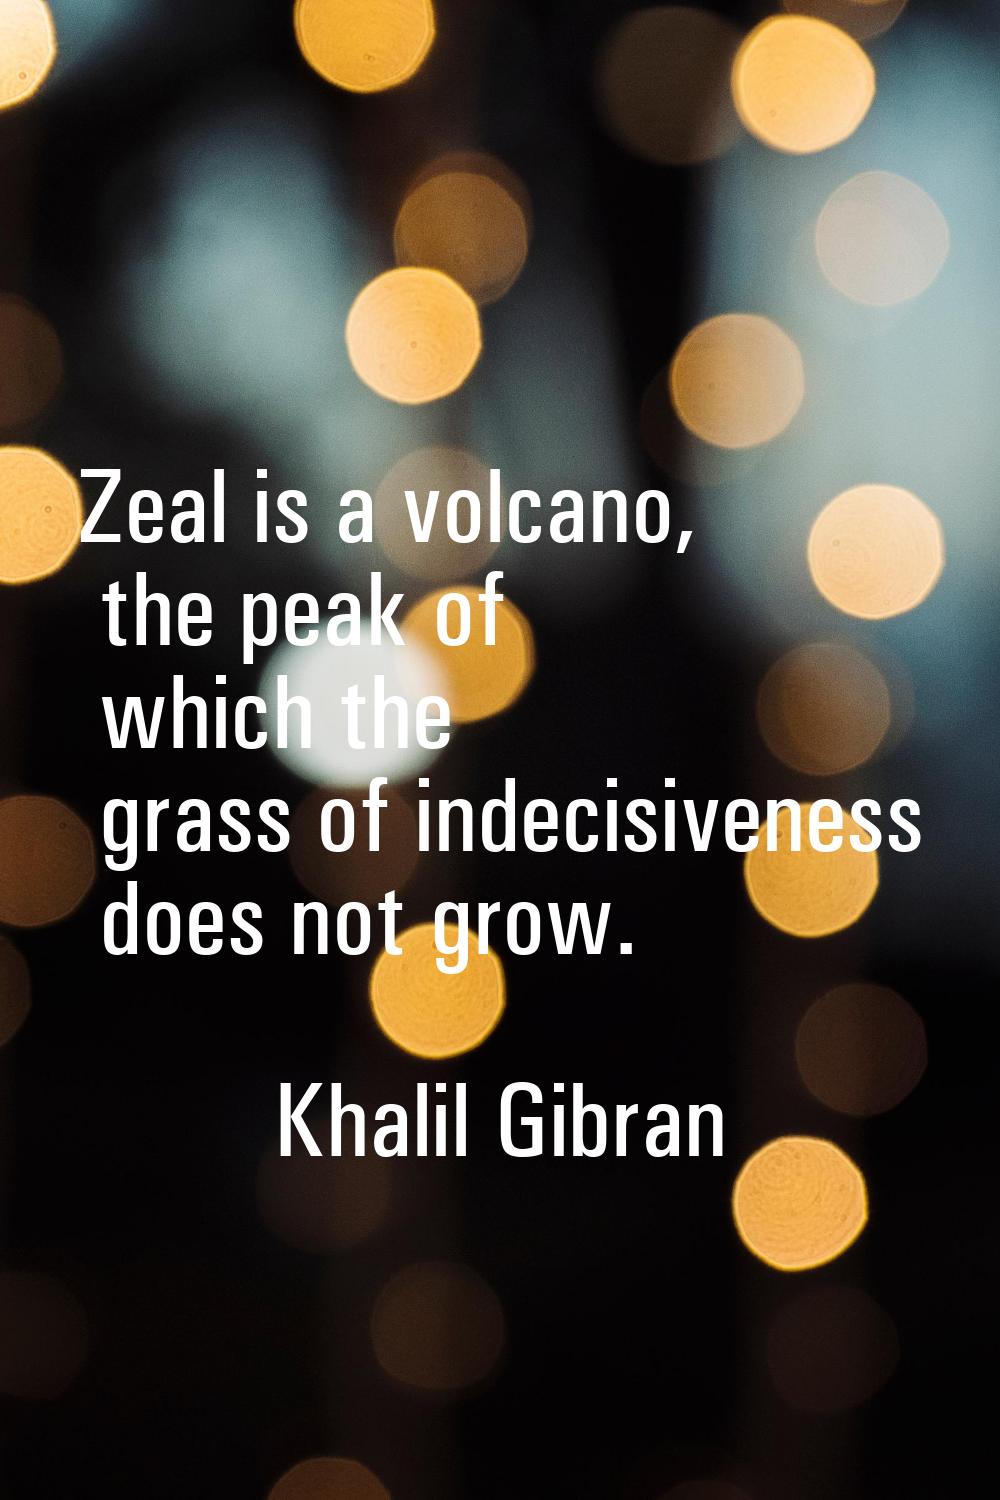 Zeal is a volcano, the peak of which the grass of indecisiveness does not grow.